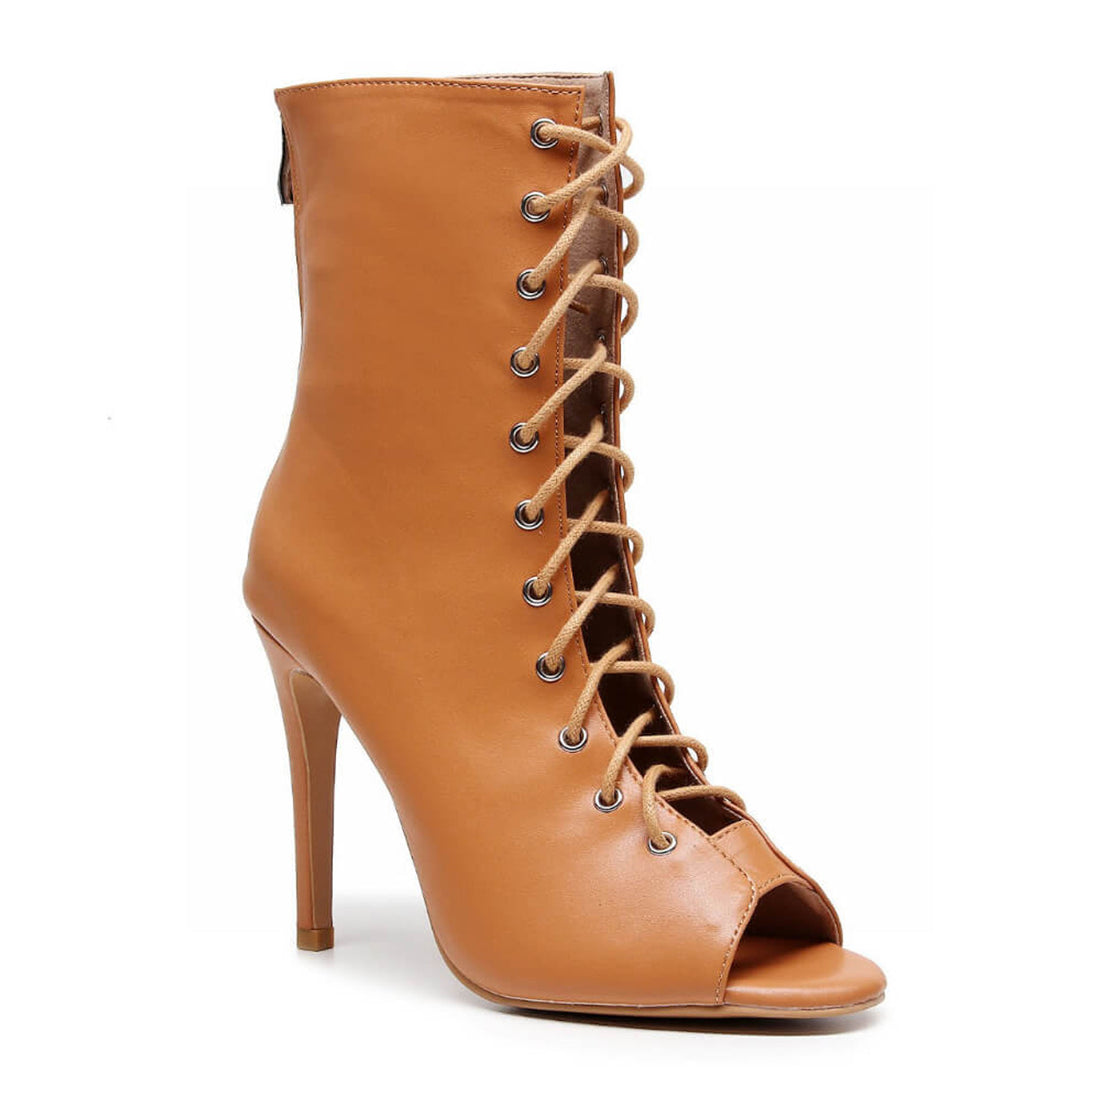 Sofiya True Nudes - Shade 4 Open Toe Cut Out Dance Bootie (Street Sole)